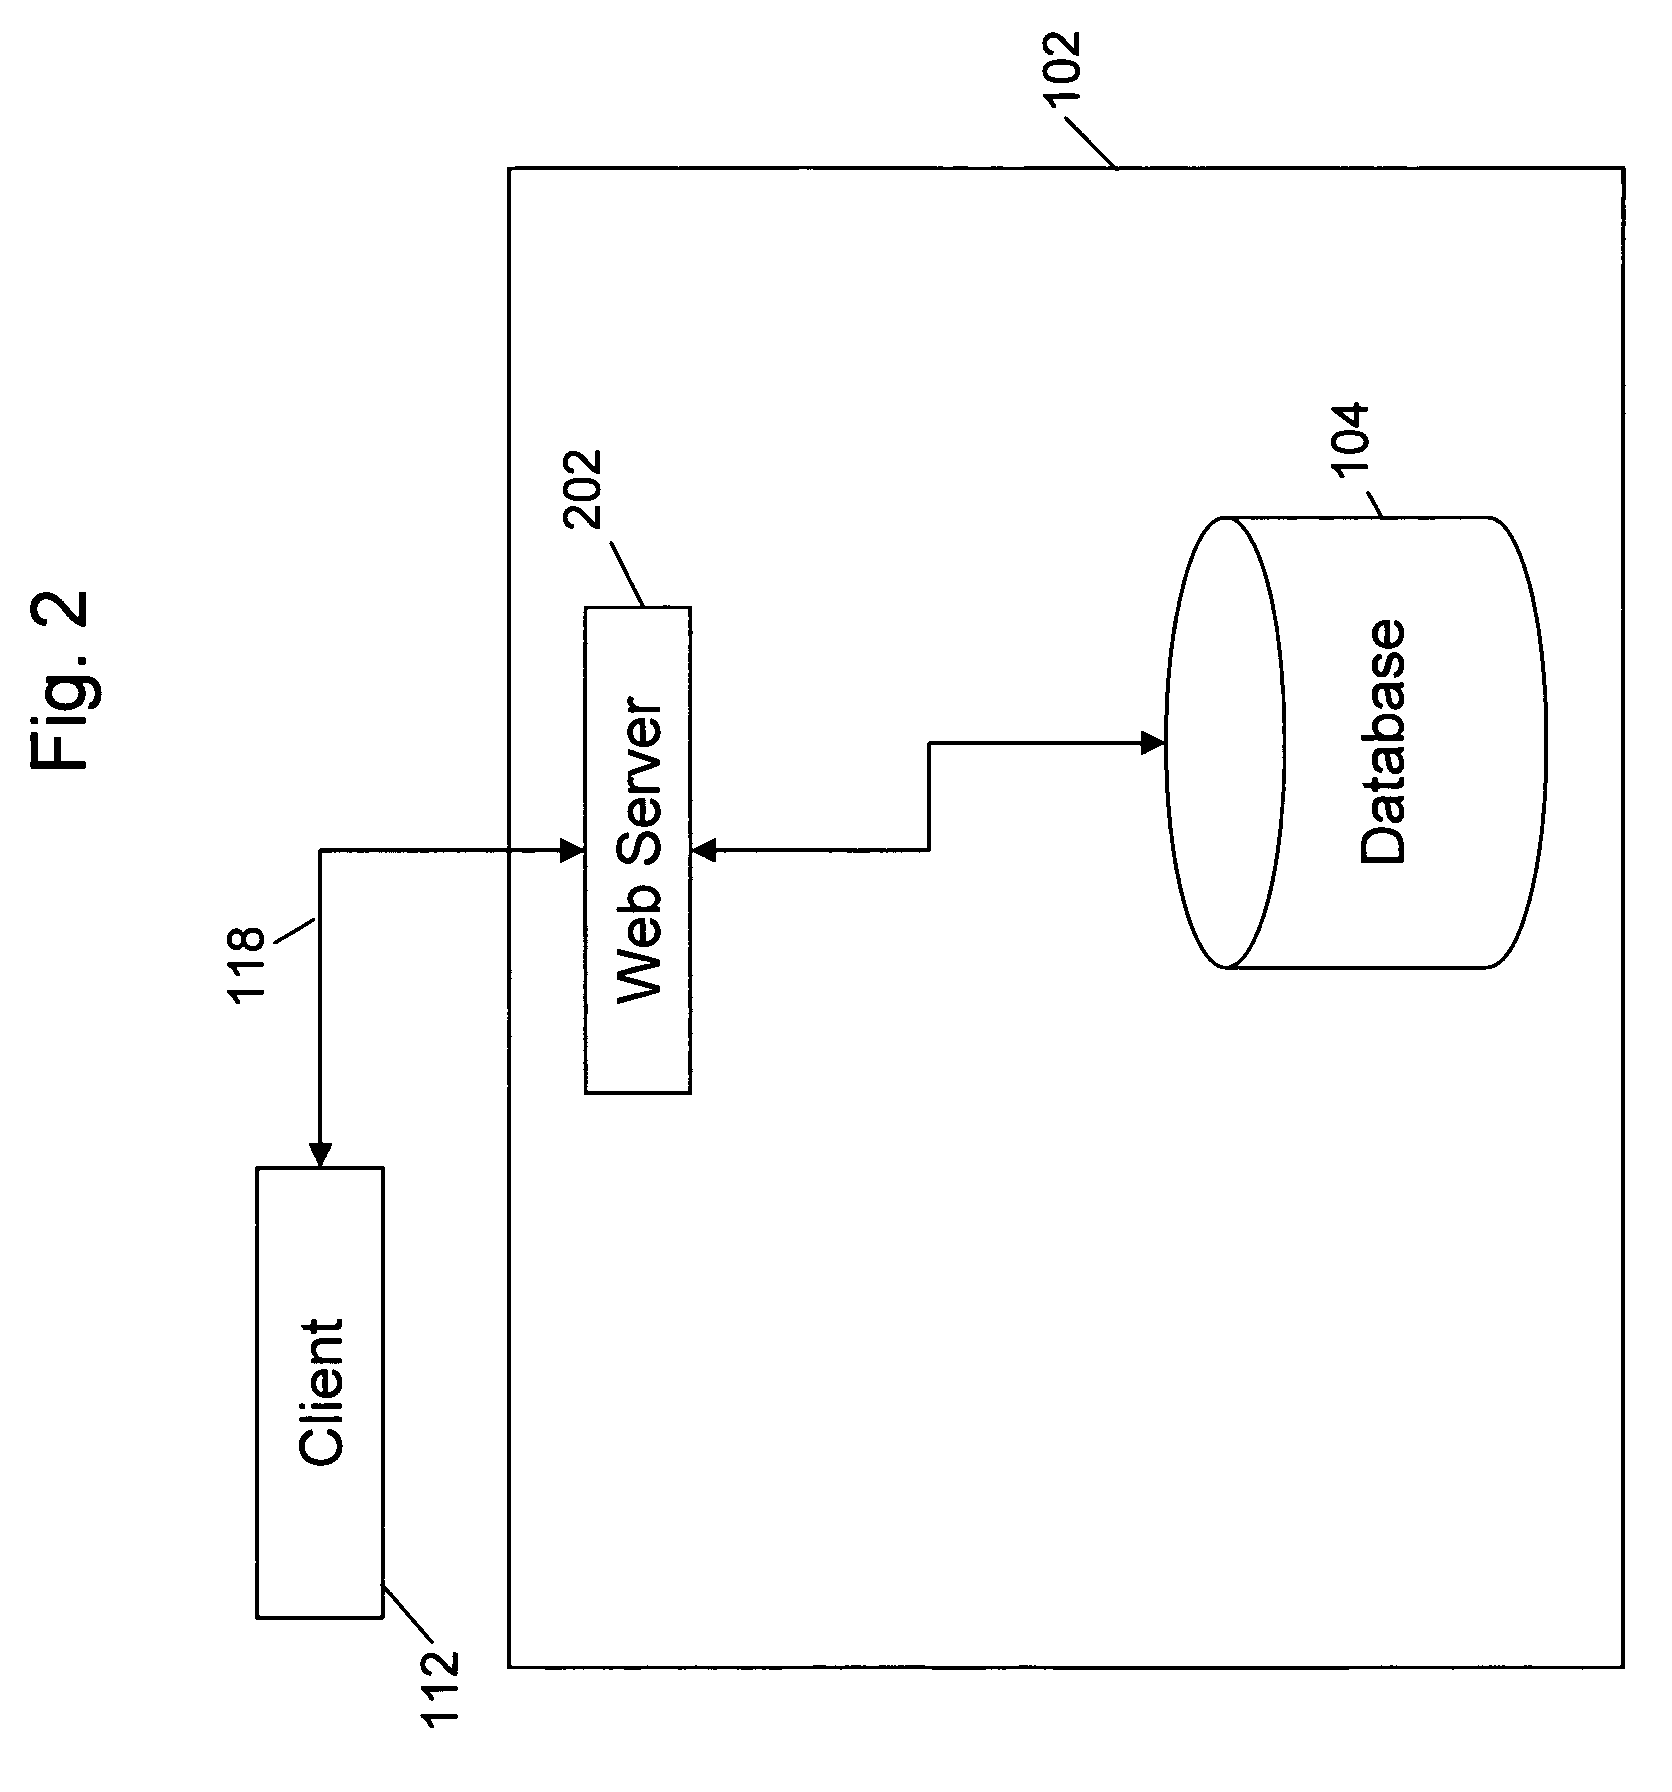 Method and system for auditing processes and projects for process improvement